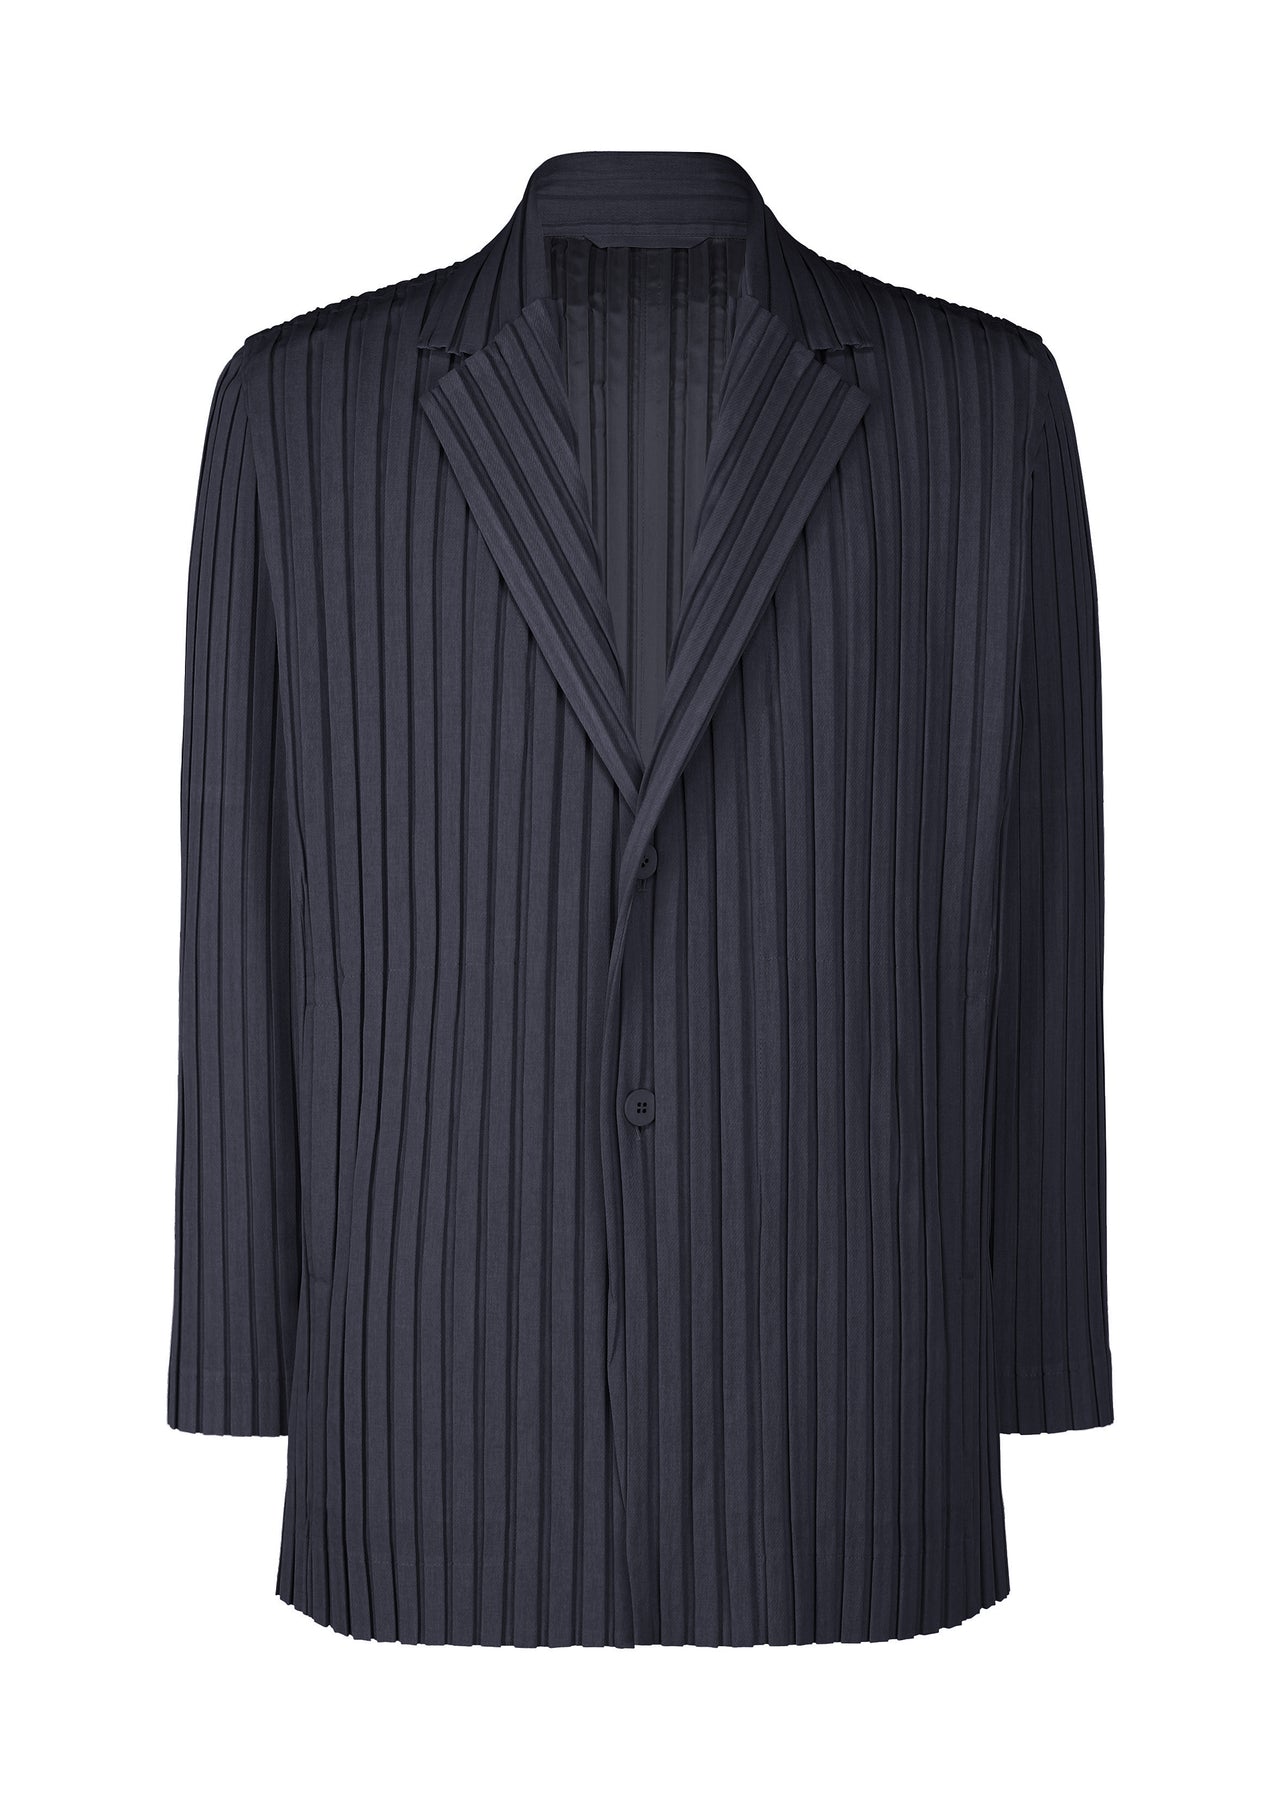 BOX PLEATS ENSEMBLE JACKET | The official ISSEY MIYAKE ONLINE 